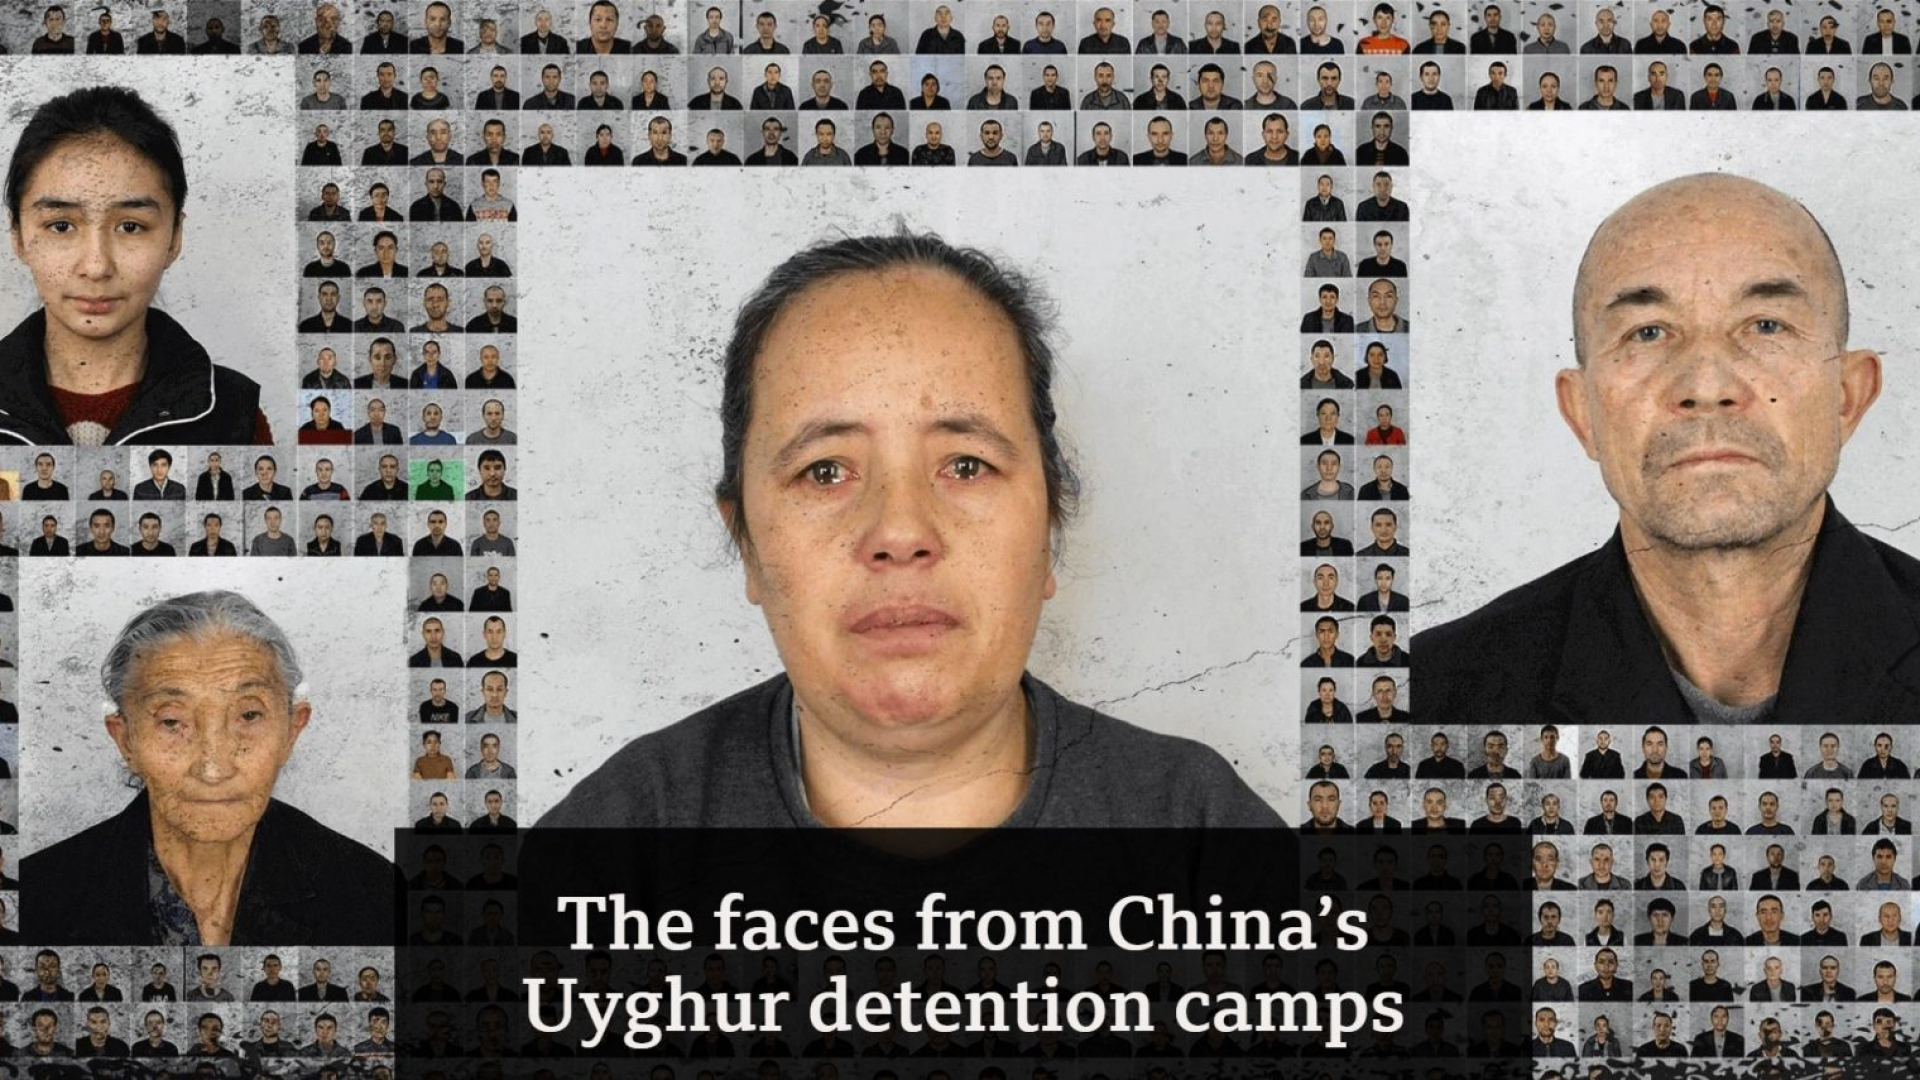 BBC Exposes Confidential Documents of Concentration Camps in Xinjiang